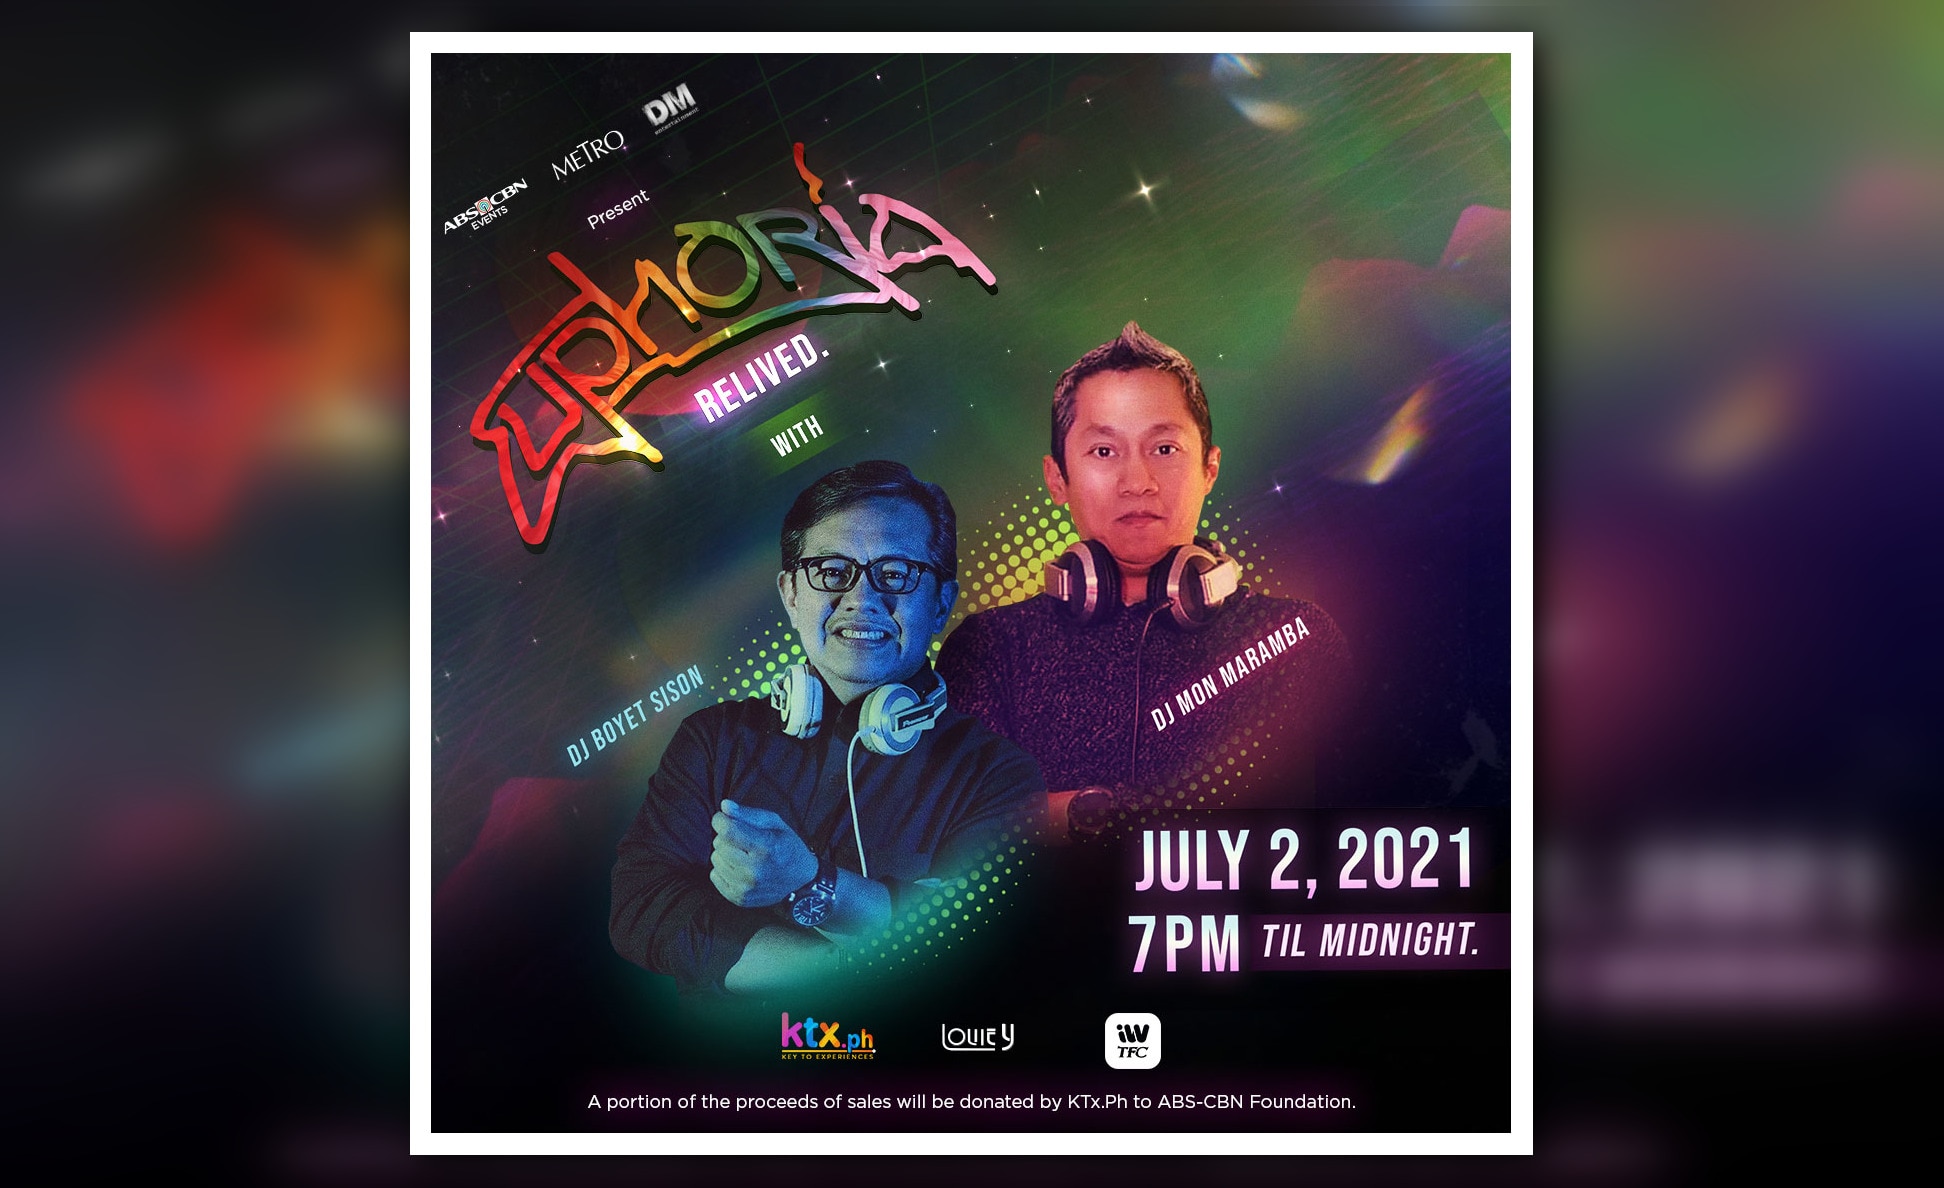 Virtual throwback disco party "Euphoria Relived" happening on July 2